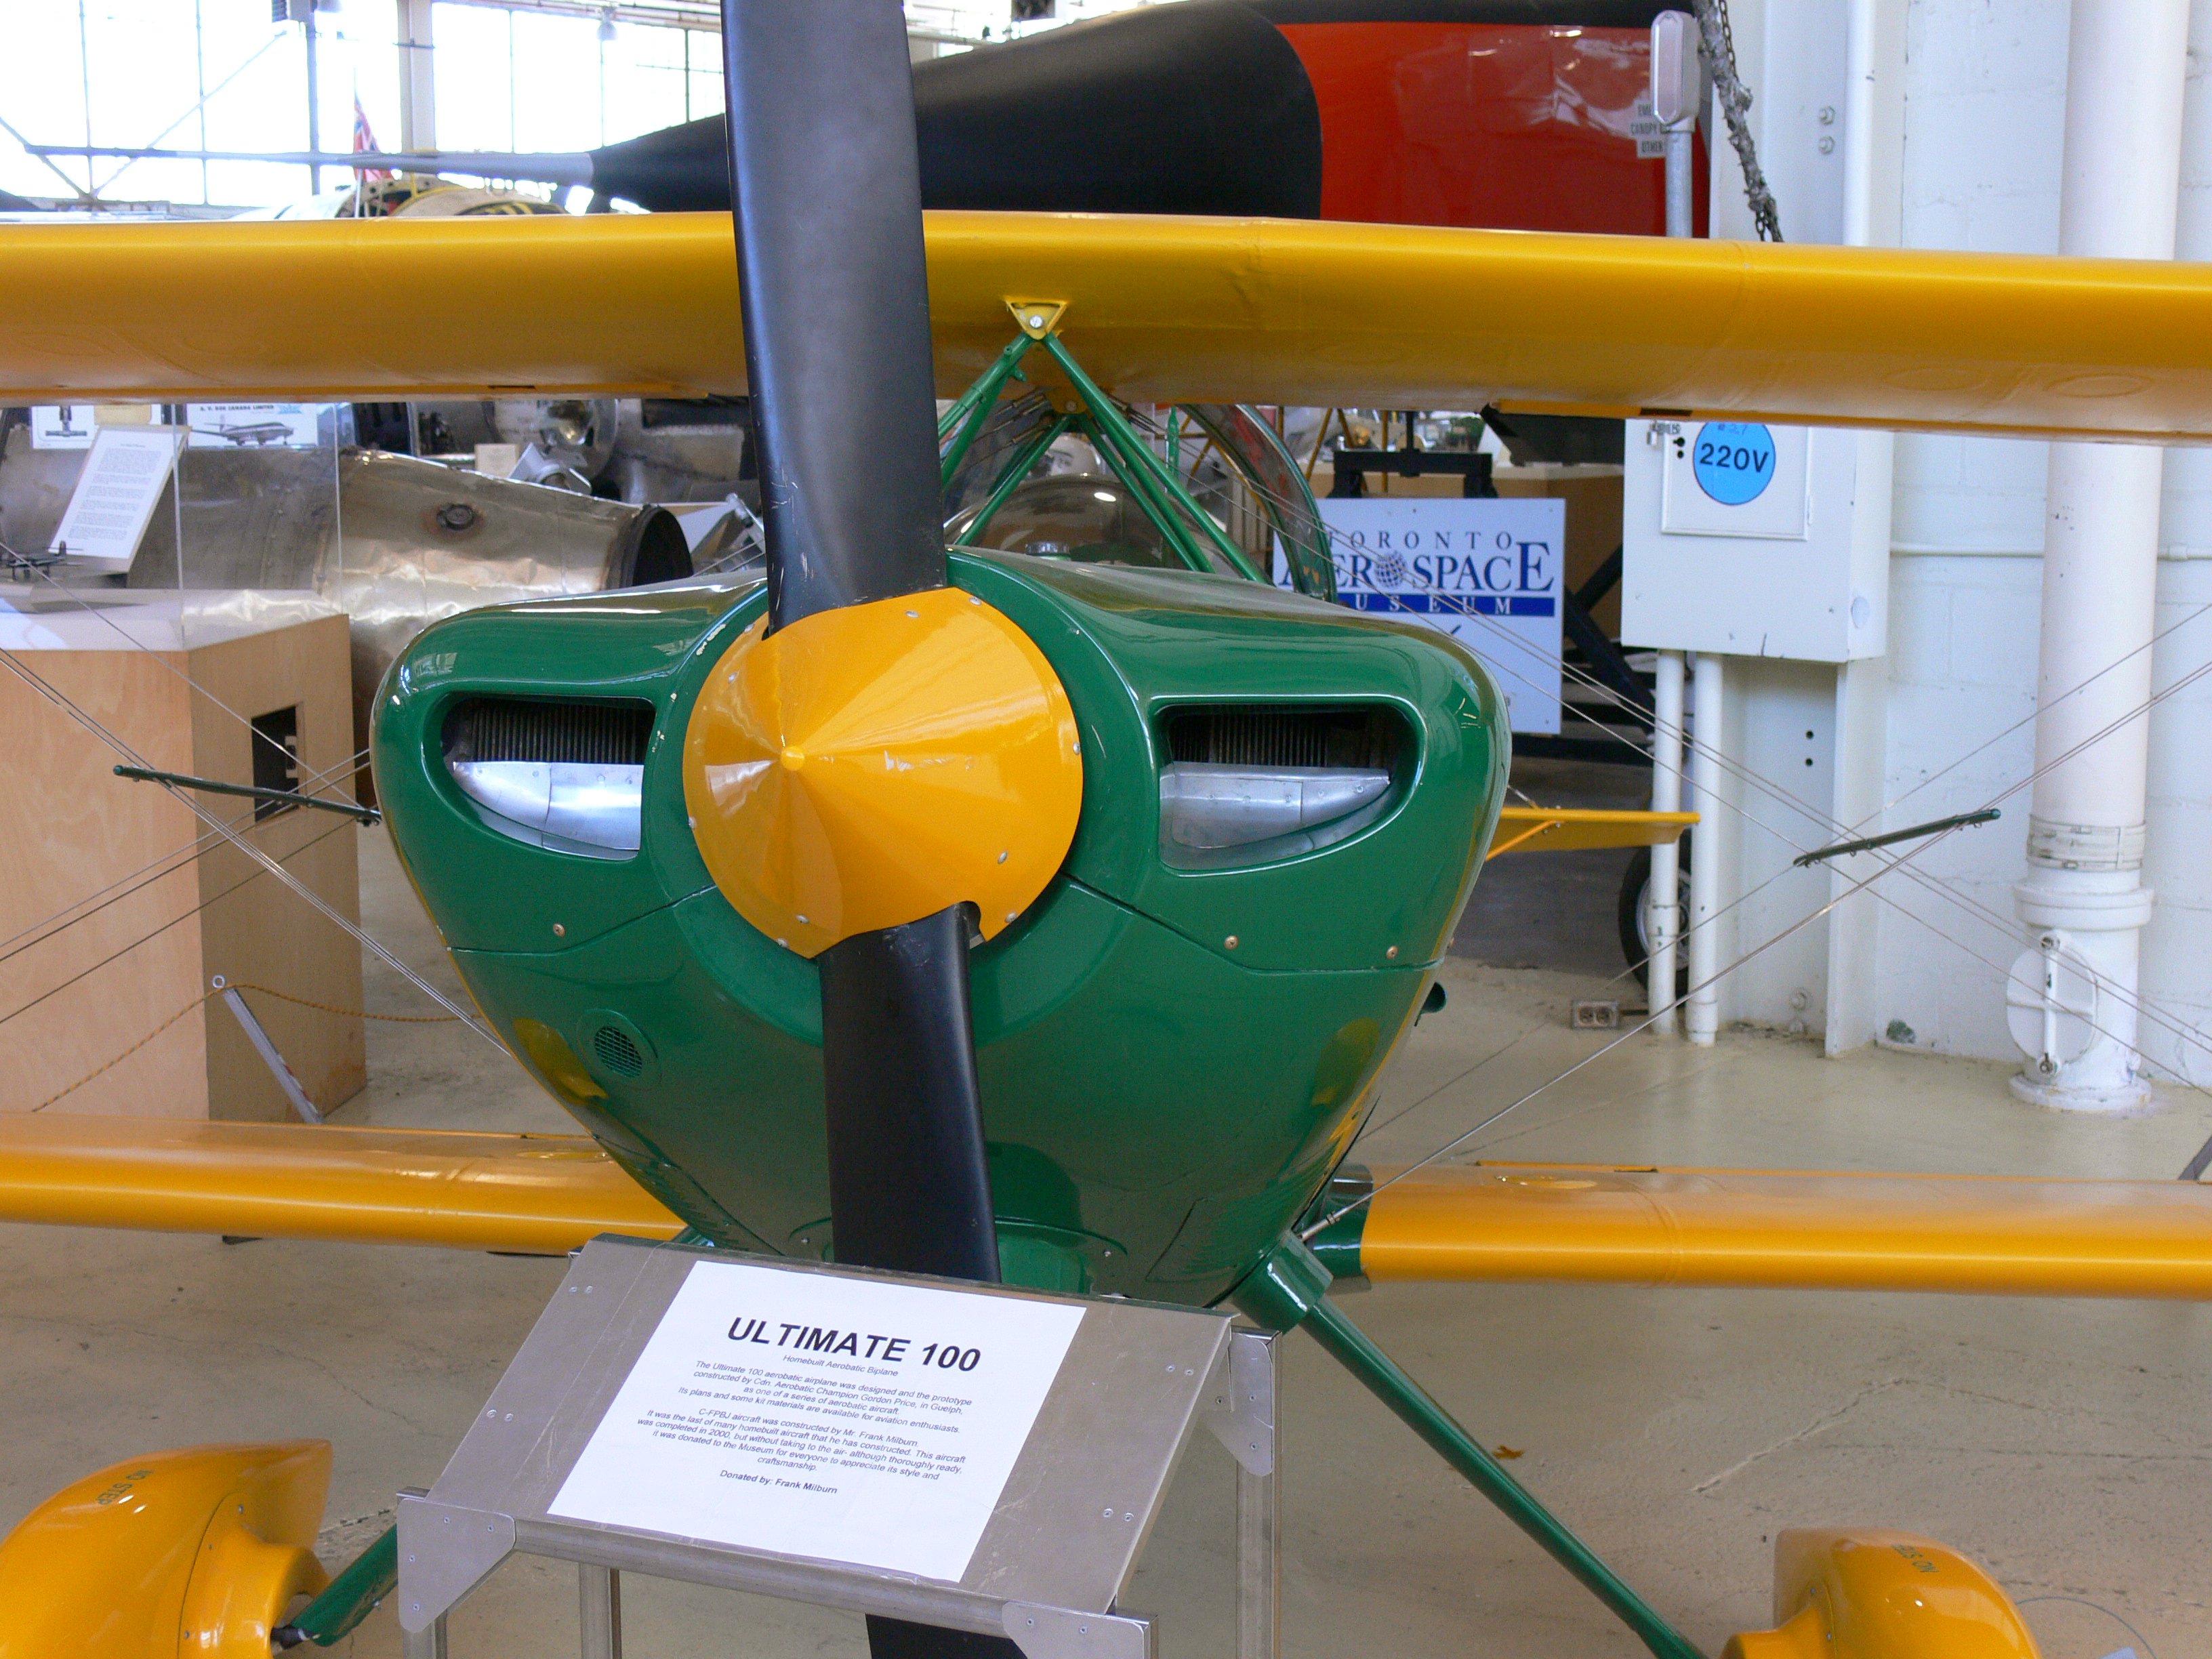 Images from the Toronto Aerospace Museum...